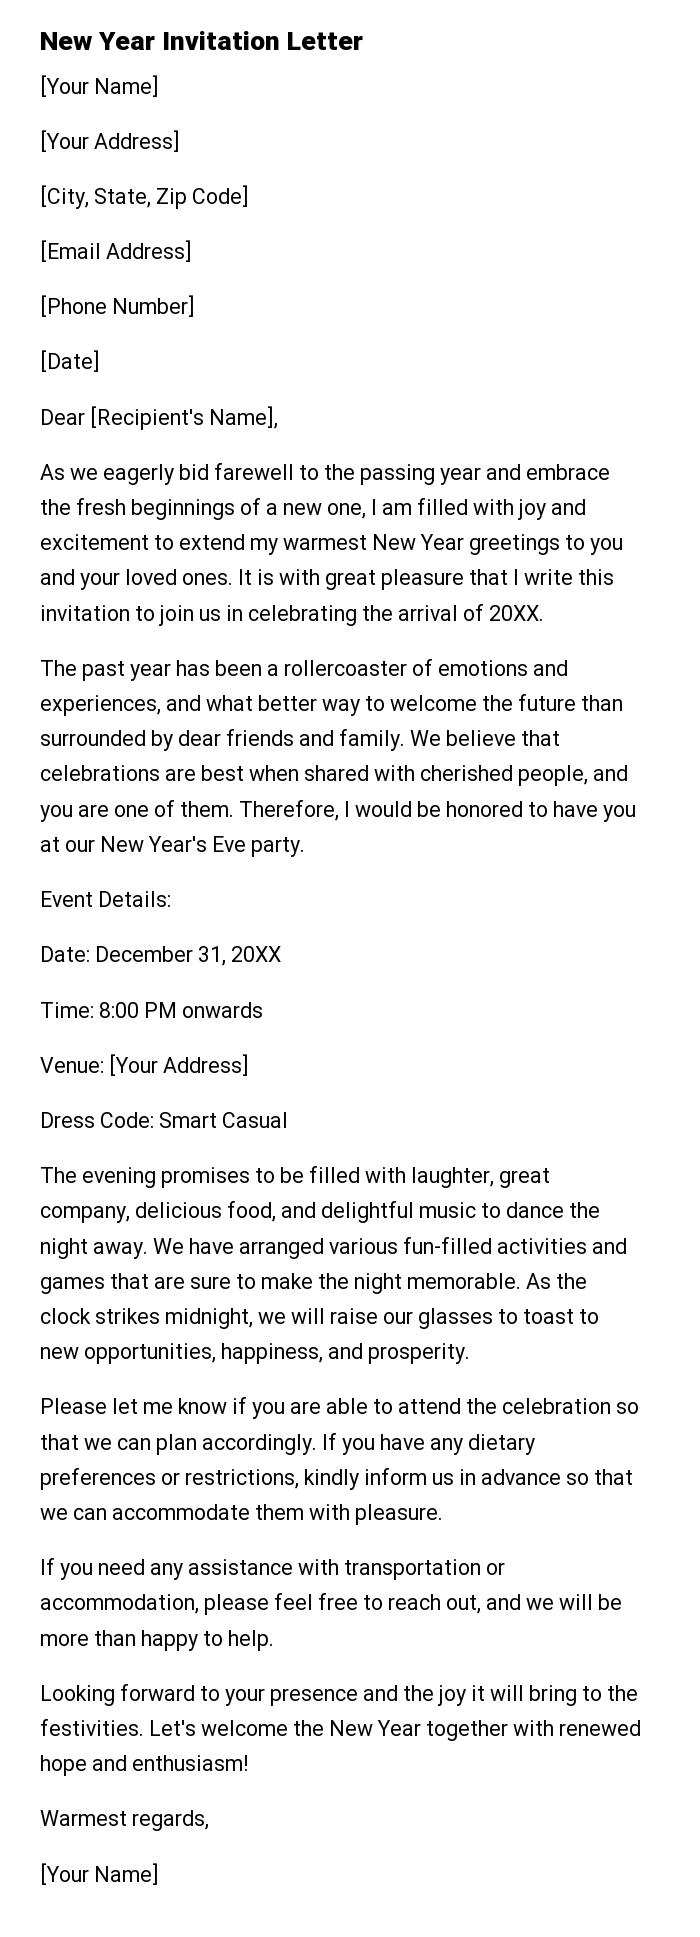 New Year Invitation Letter